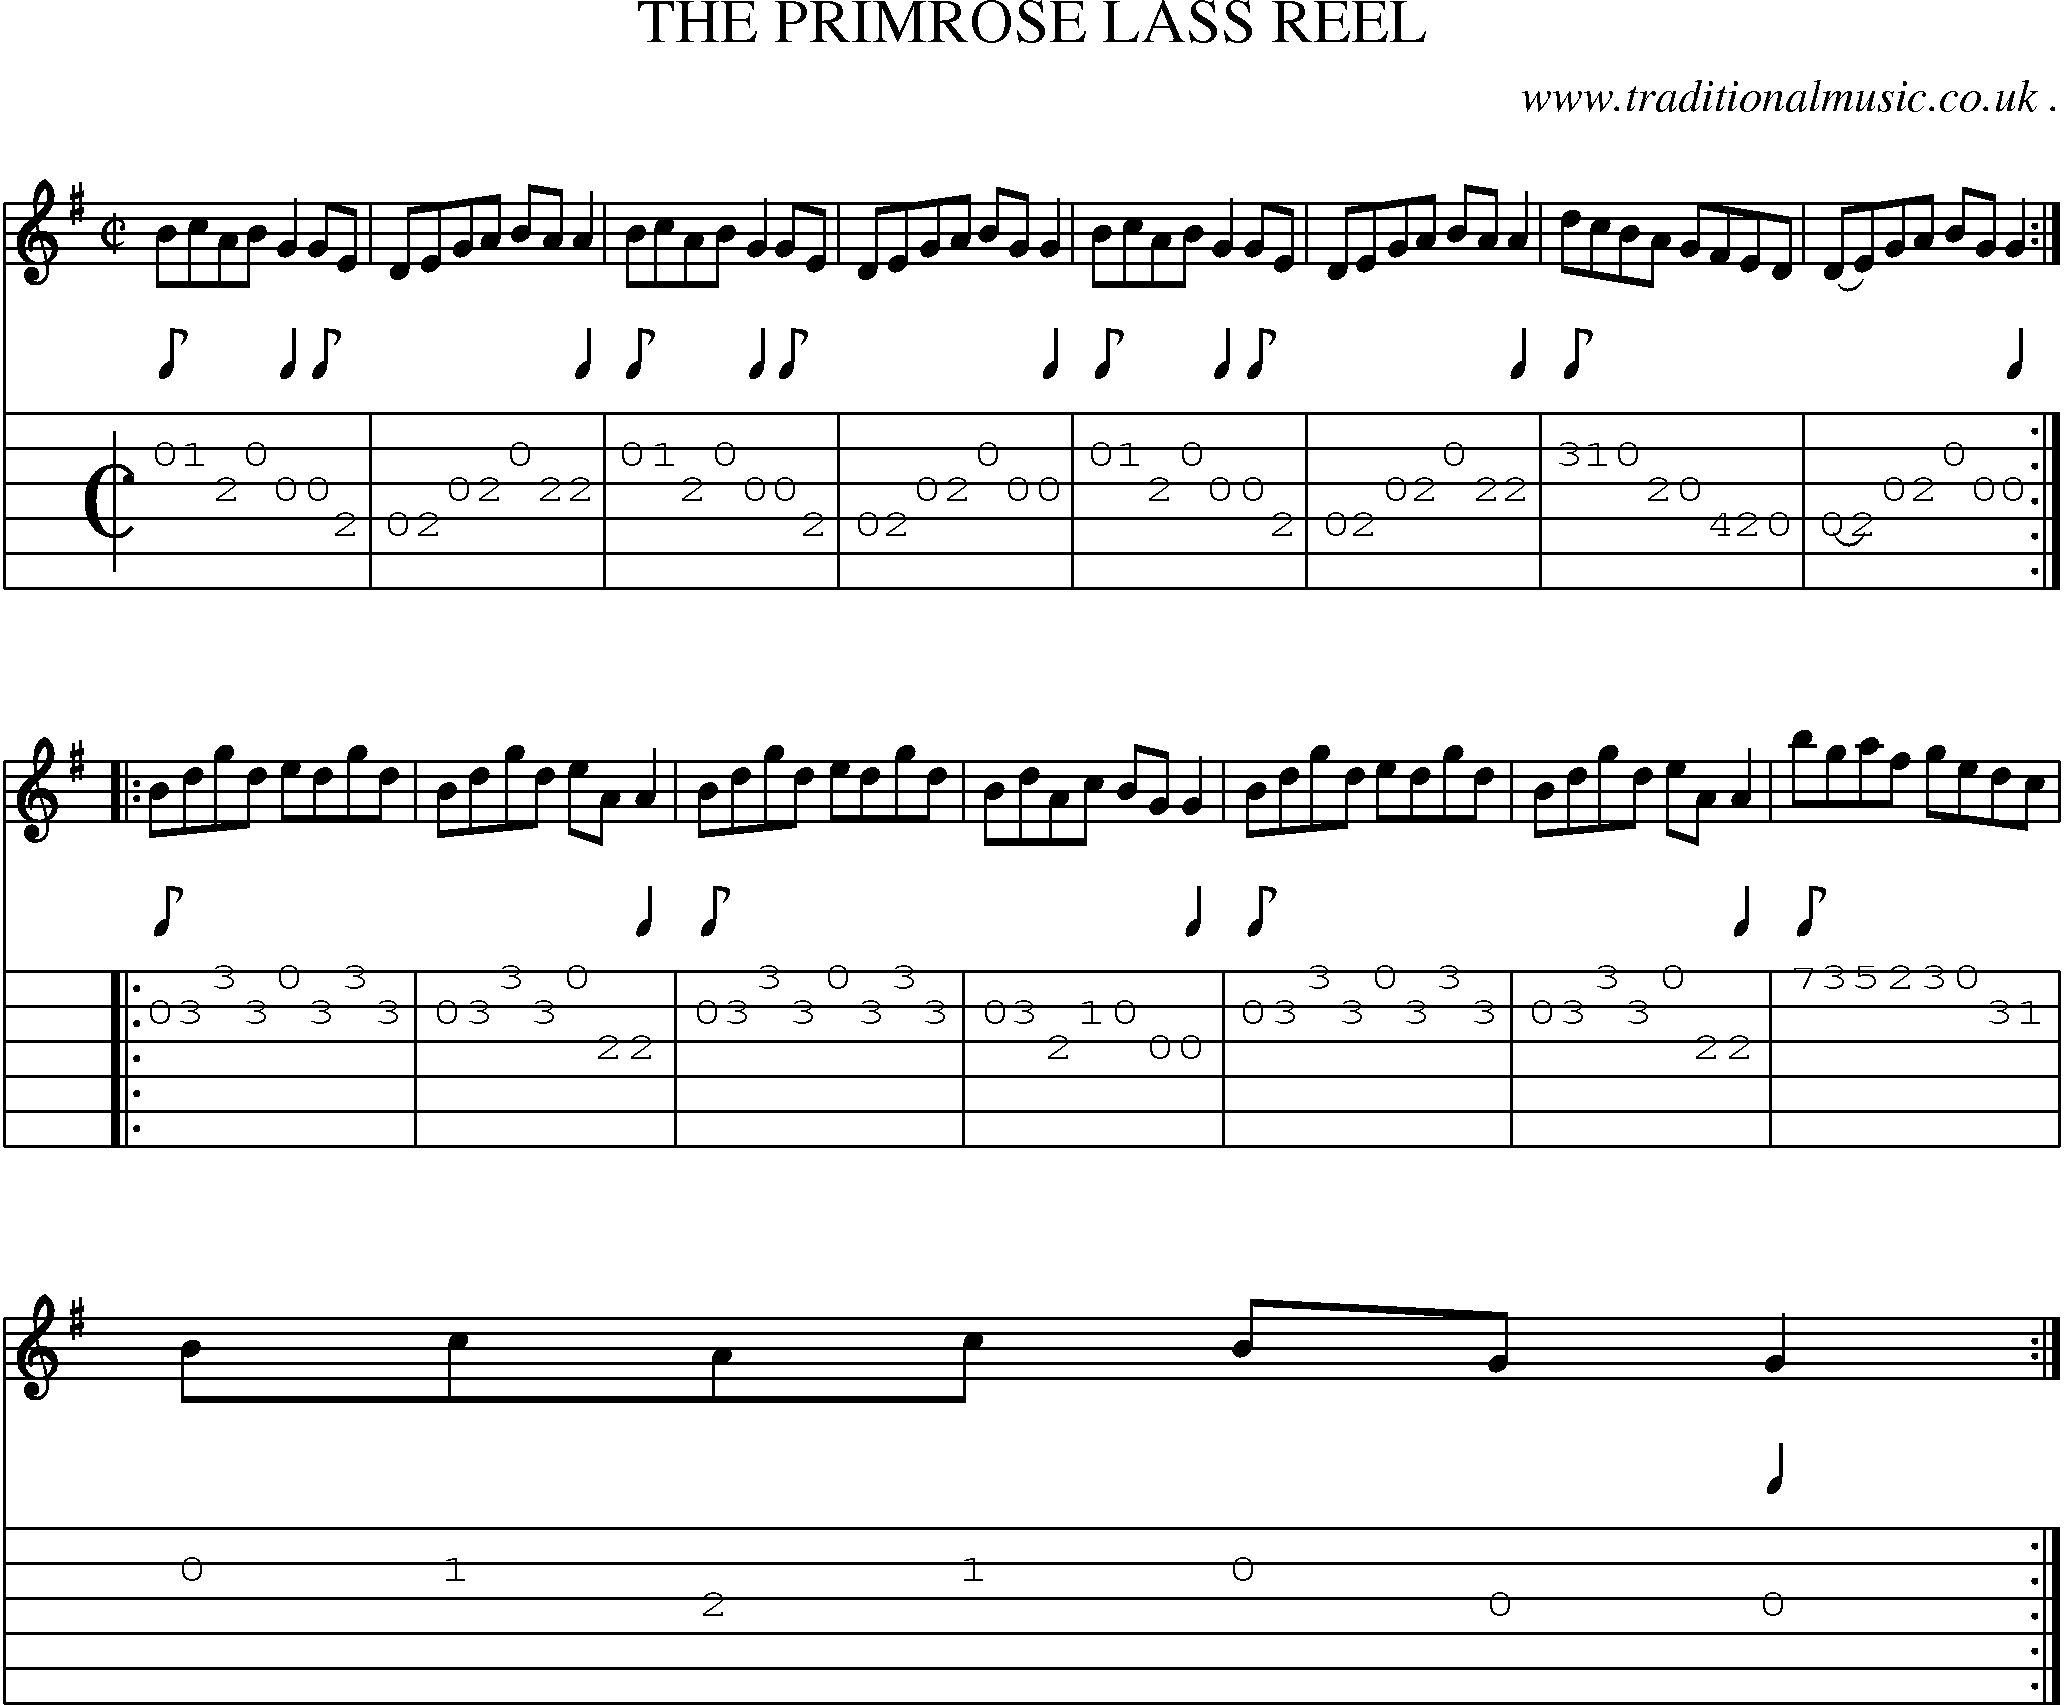 Sheet-Music and Guitar Tabs for The Primrose Lass Reel